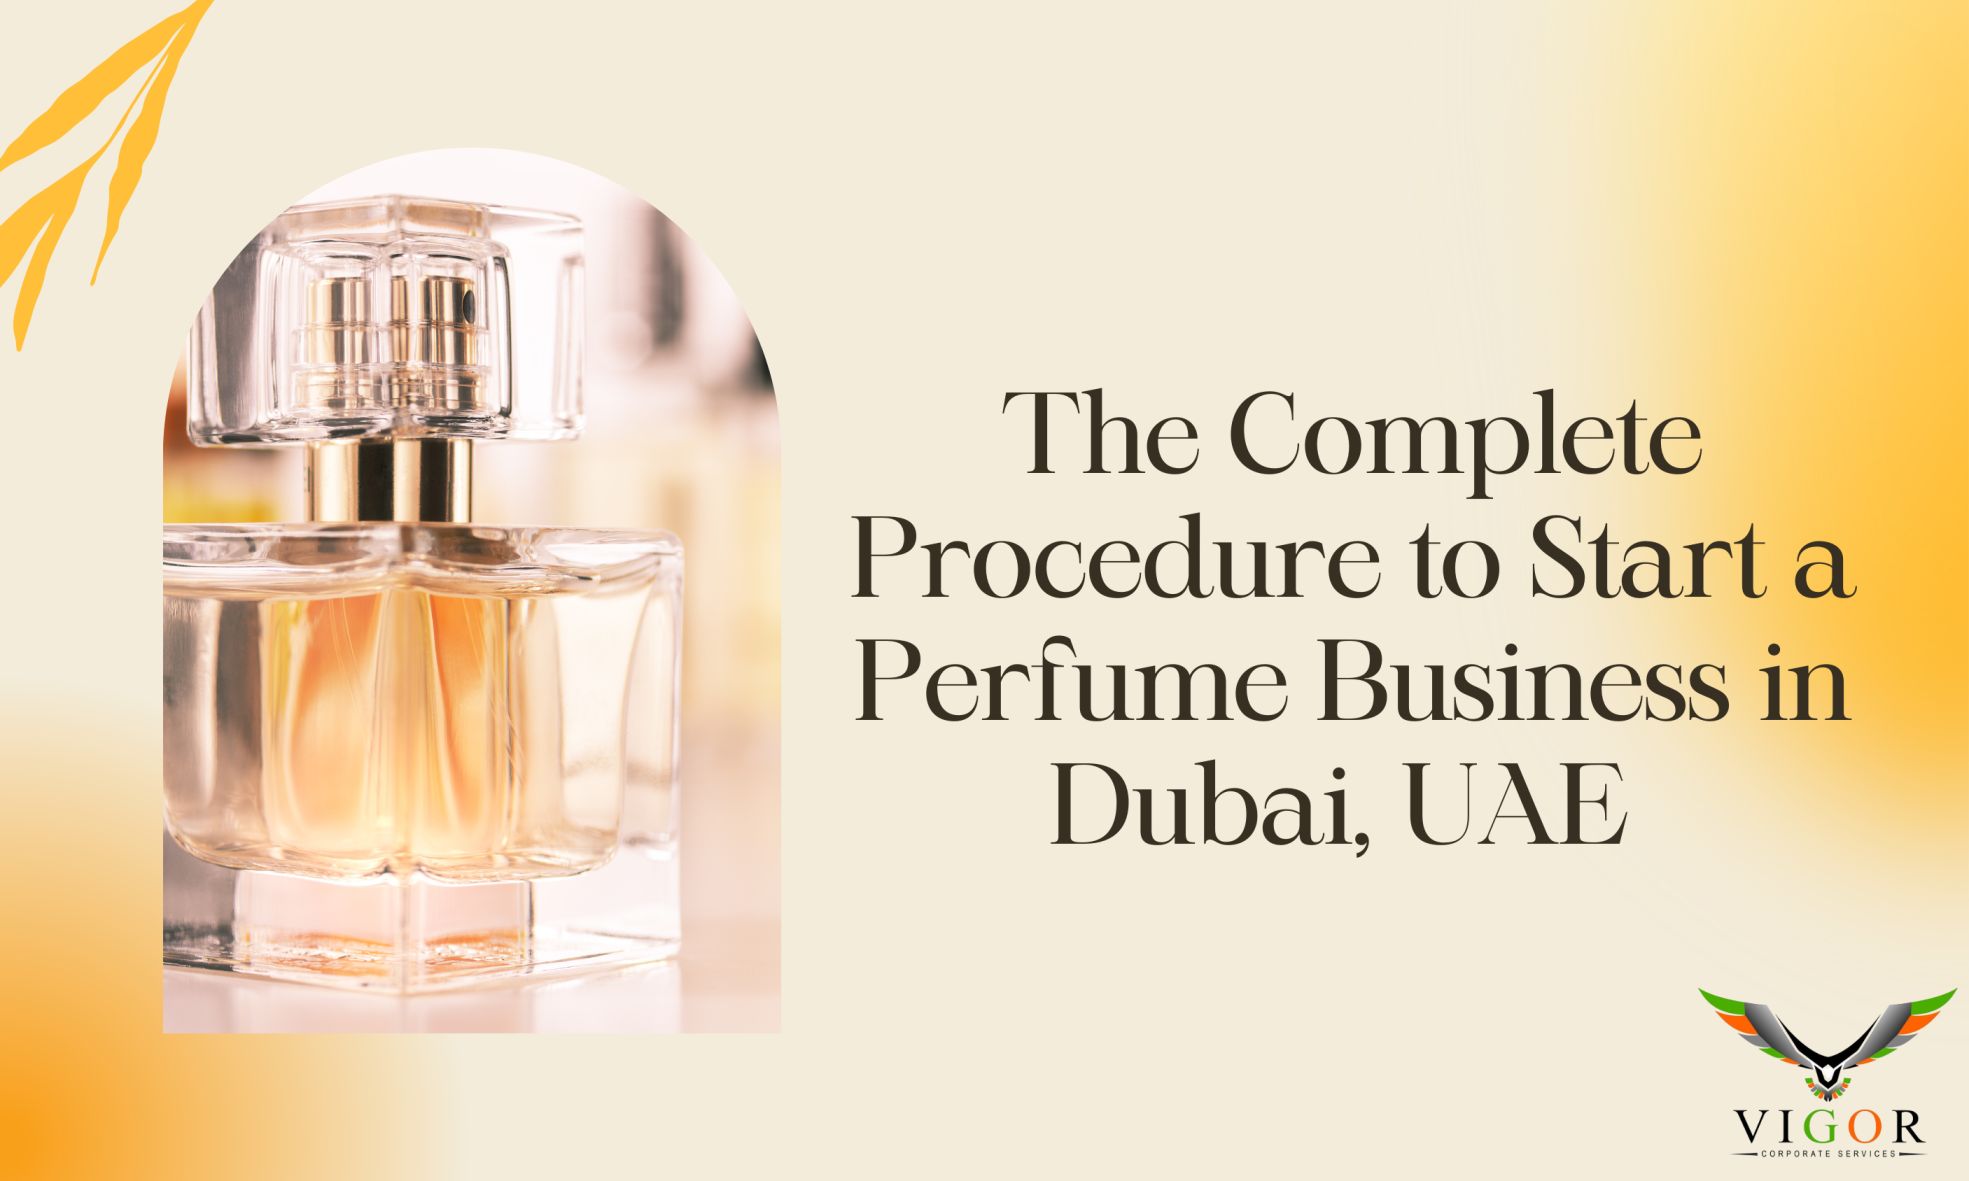 The Complete Procedure to Start a Perfume Business in Dubai, UAE